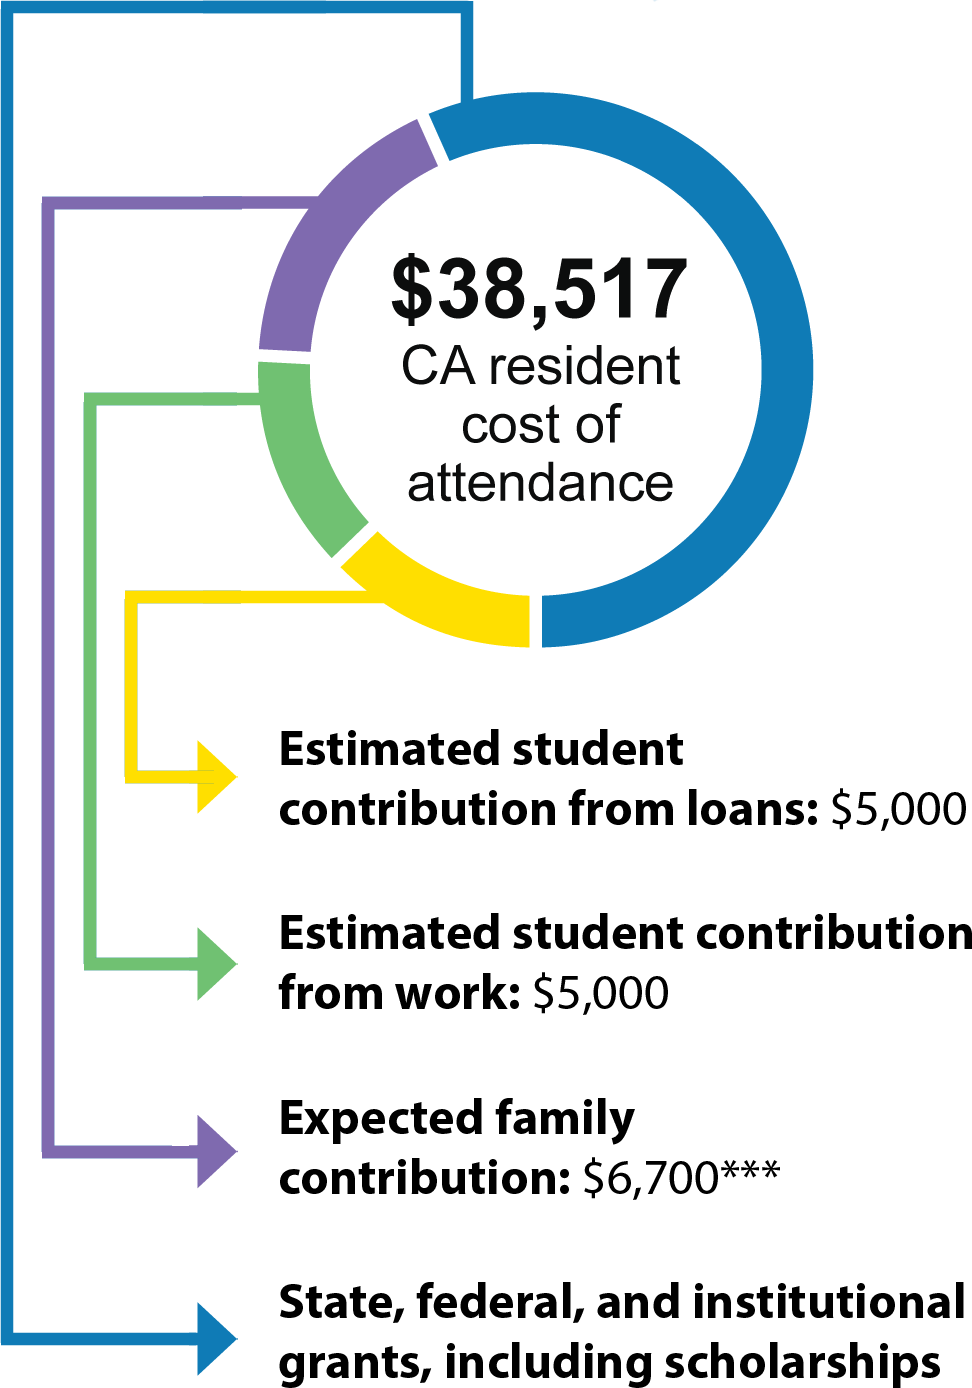 Of the $38,517 cost of attendence for a student who is a California resident: an estimated $5,000 (13%)  is contributed from student loans; an estimated $5,000 (13%) is contributed from work; $6,700*** (17%) is expected to be contributed from family; and the rest from state, federal, and institutional grants, including scholarships.